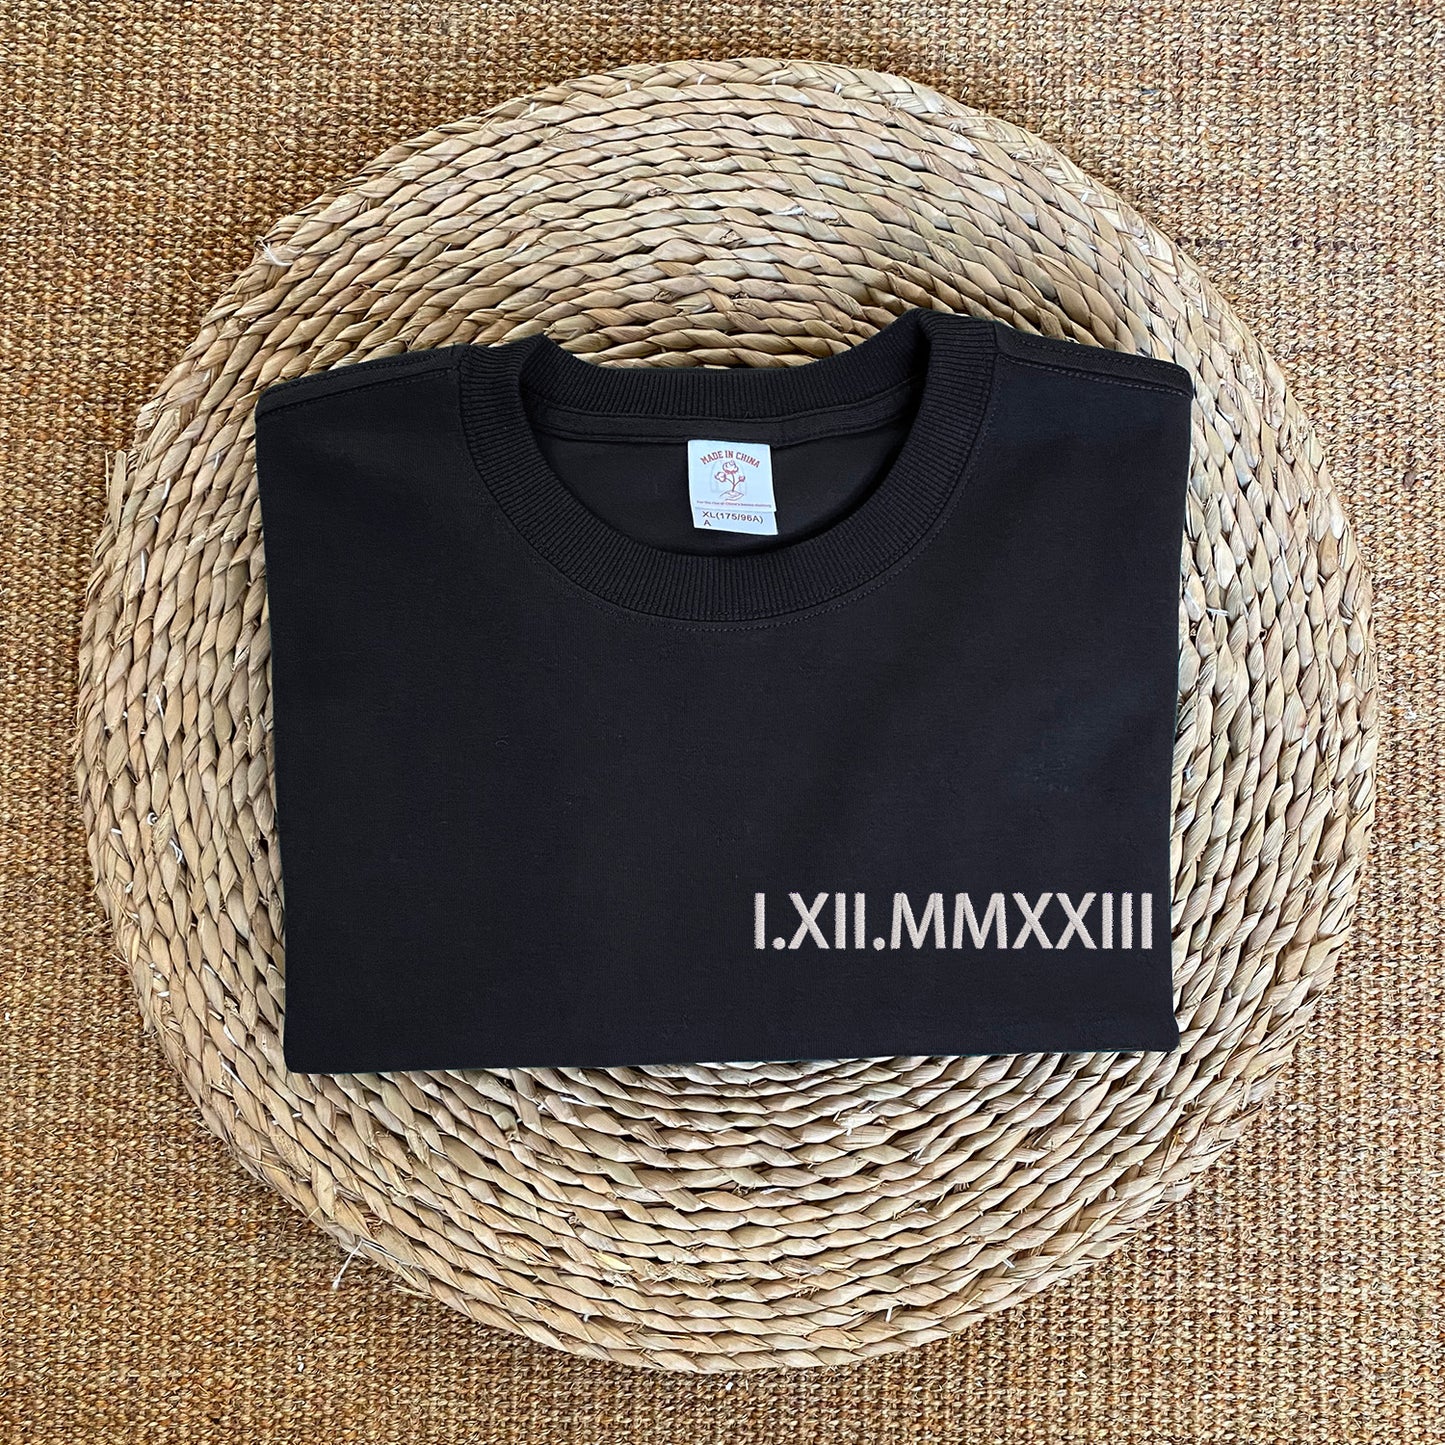 Roman Numeral Chic: Tailor-Made Embroidered Sweatshirt for You